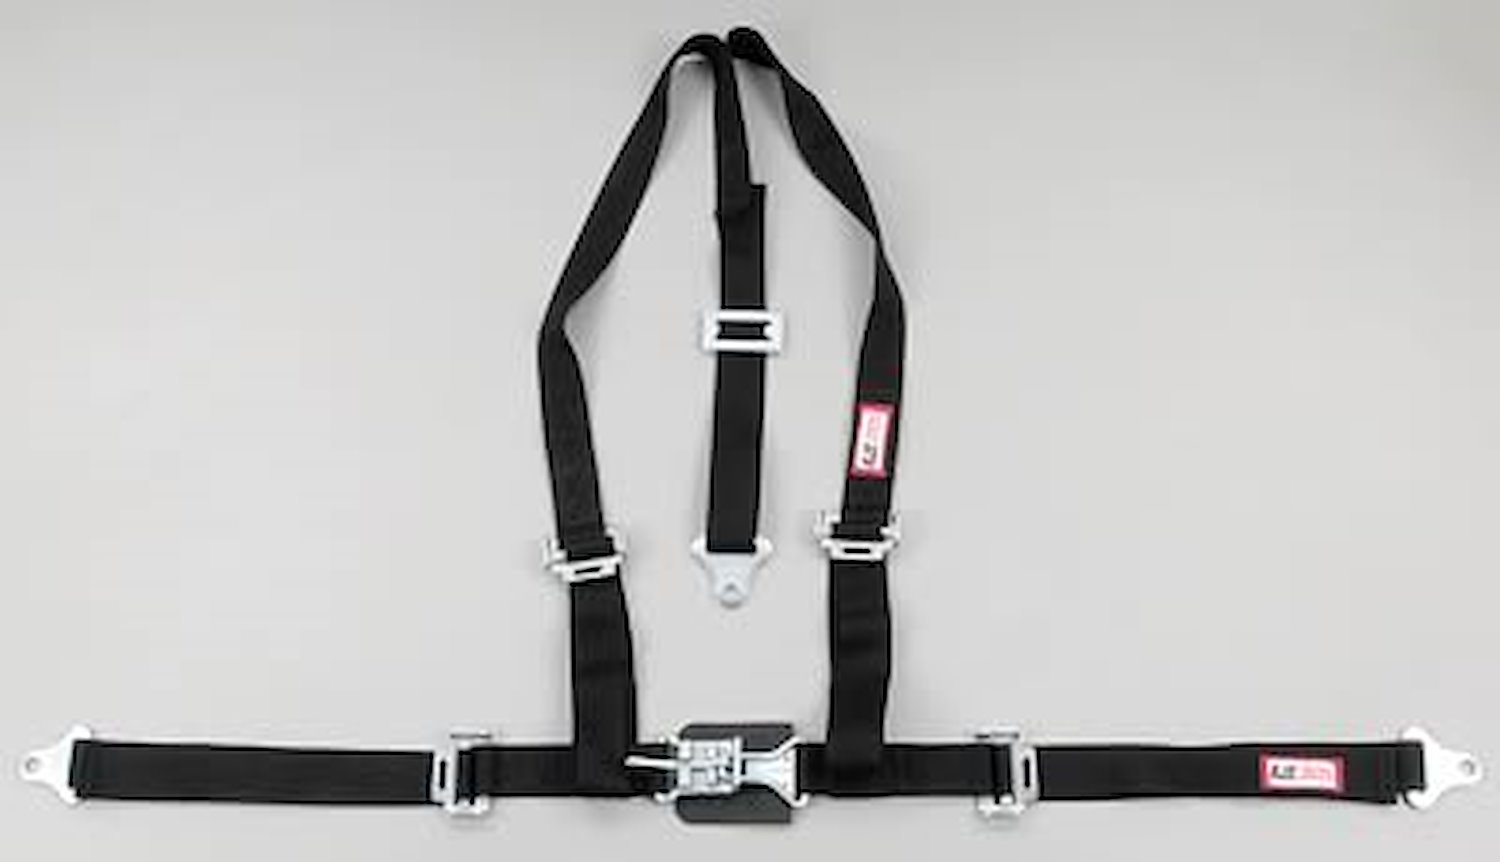 NON-SFI L&L HARNESS 2 PULL UP Lap Belt SNAP SEWN IN 2 S.H. INDIVIDUAL FLOOR Mount w/STERNUM STRAP WRAP/SNAP YELLOW